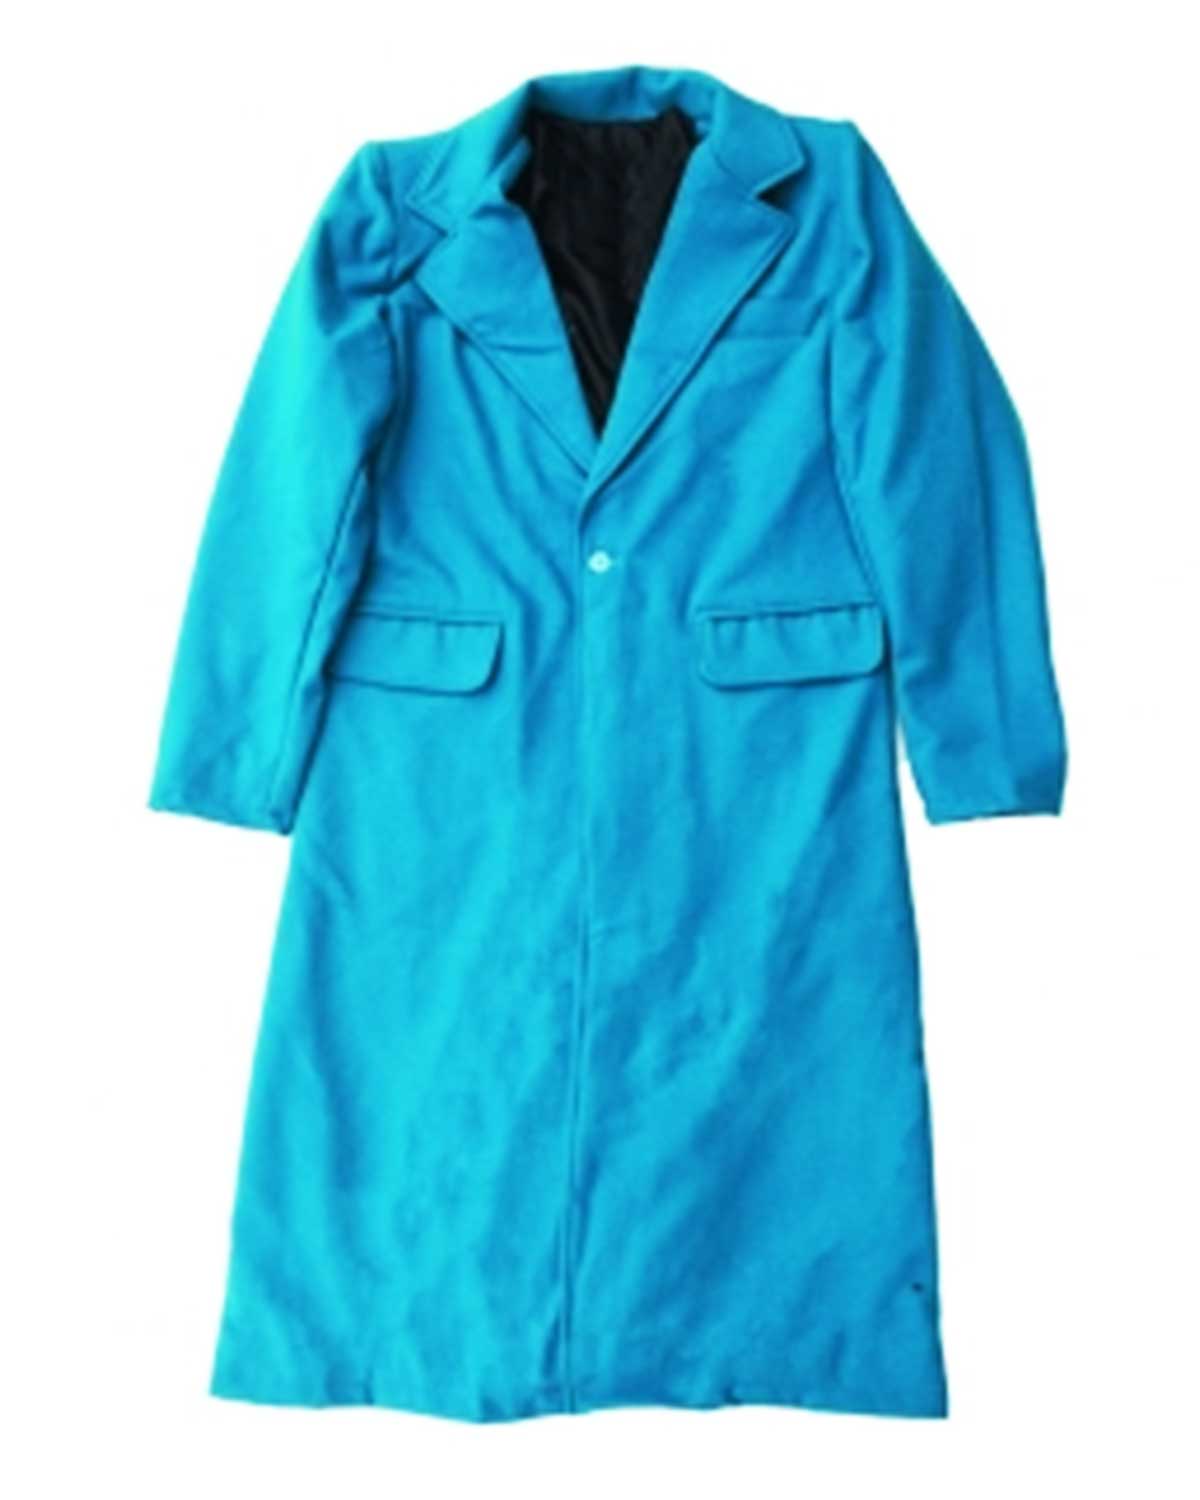 A Discovery of Witches Diana Bishop Blue Coat | Elite Jacket